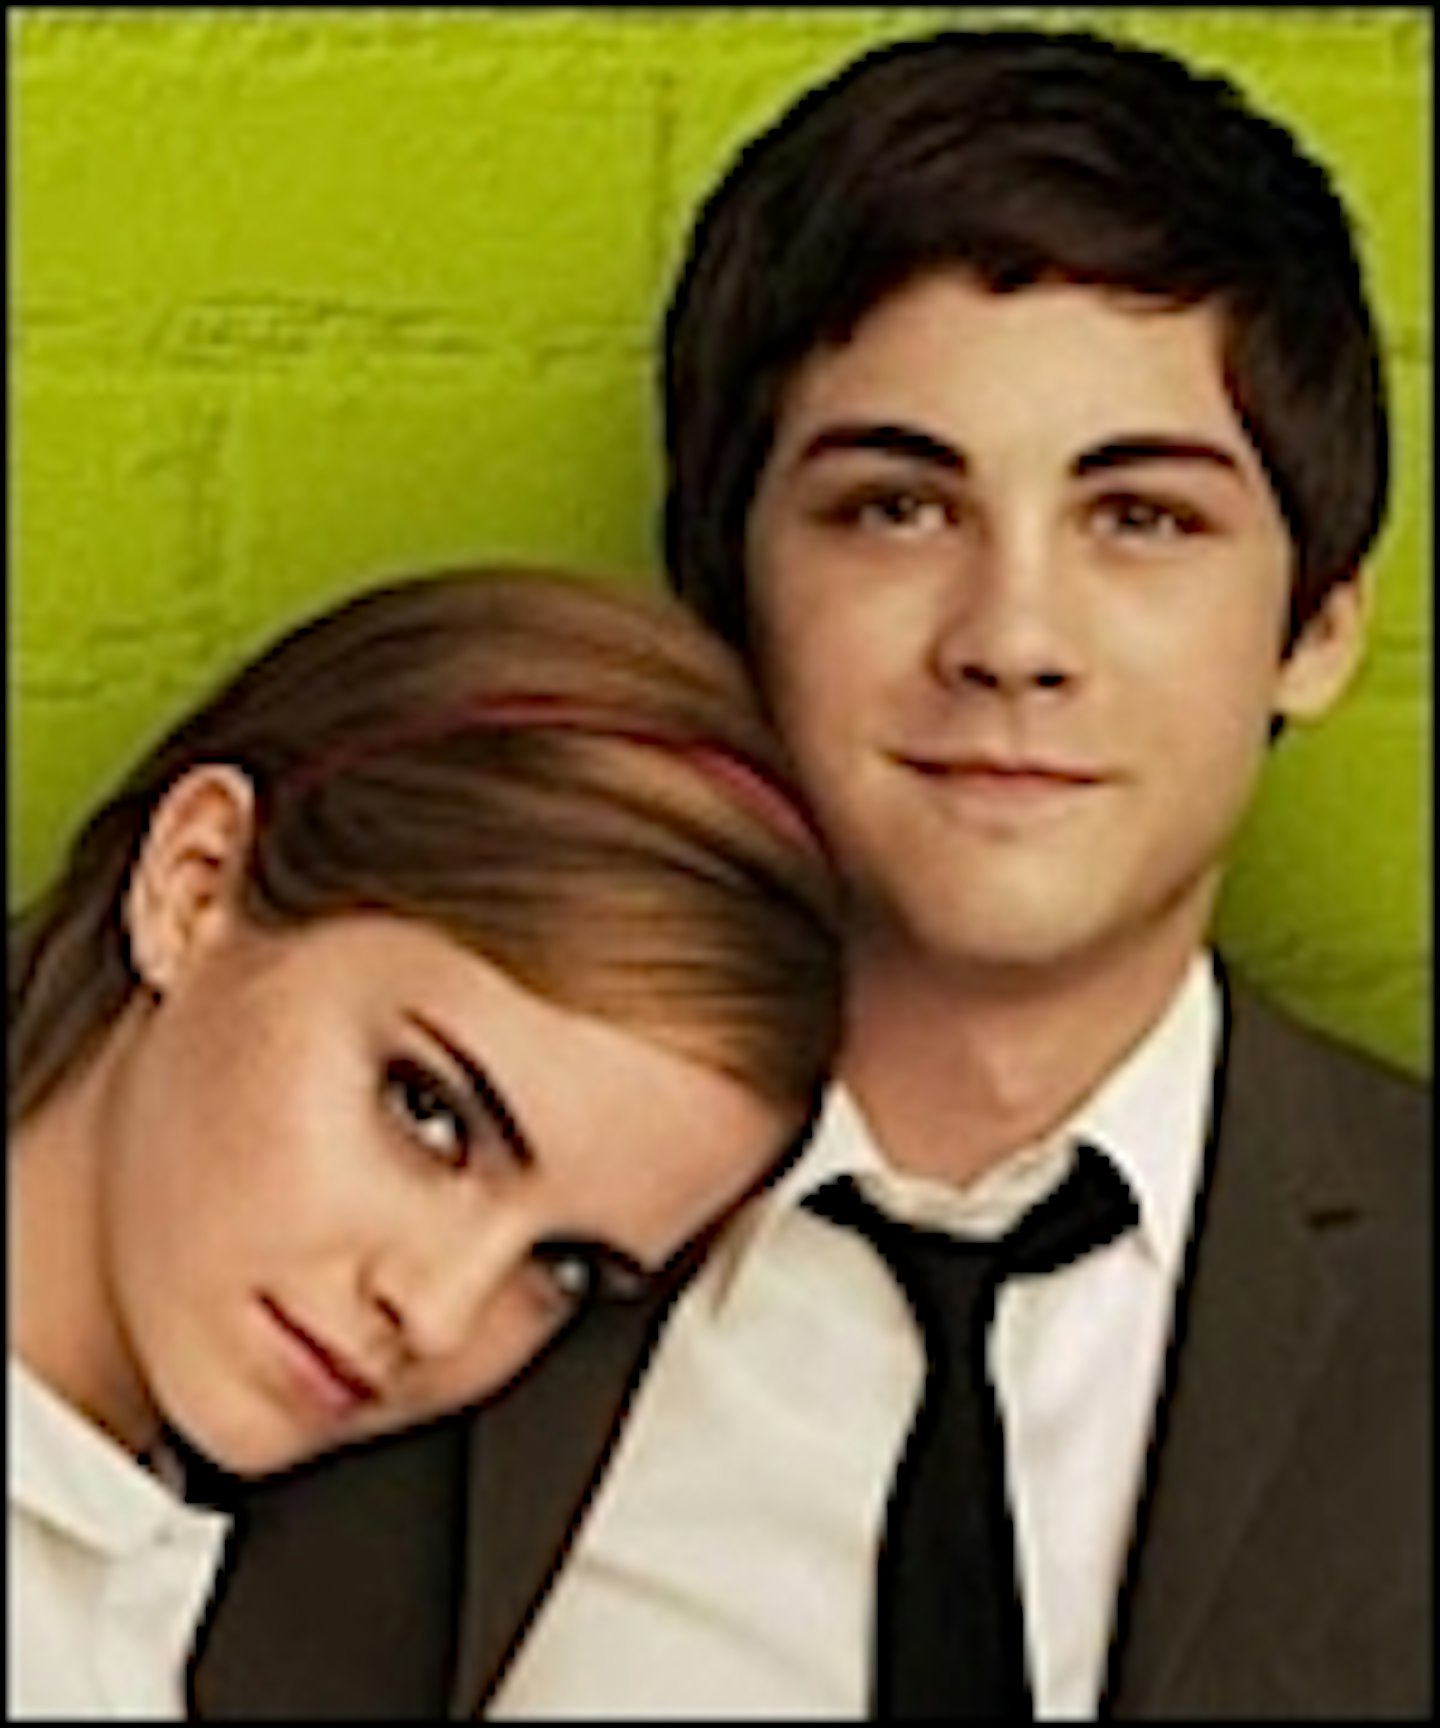 Know The Perks Of Being A Wallflower?